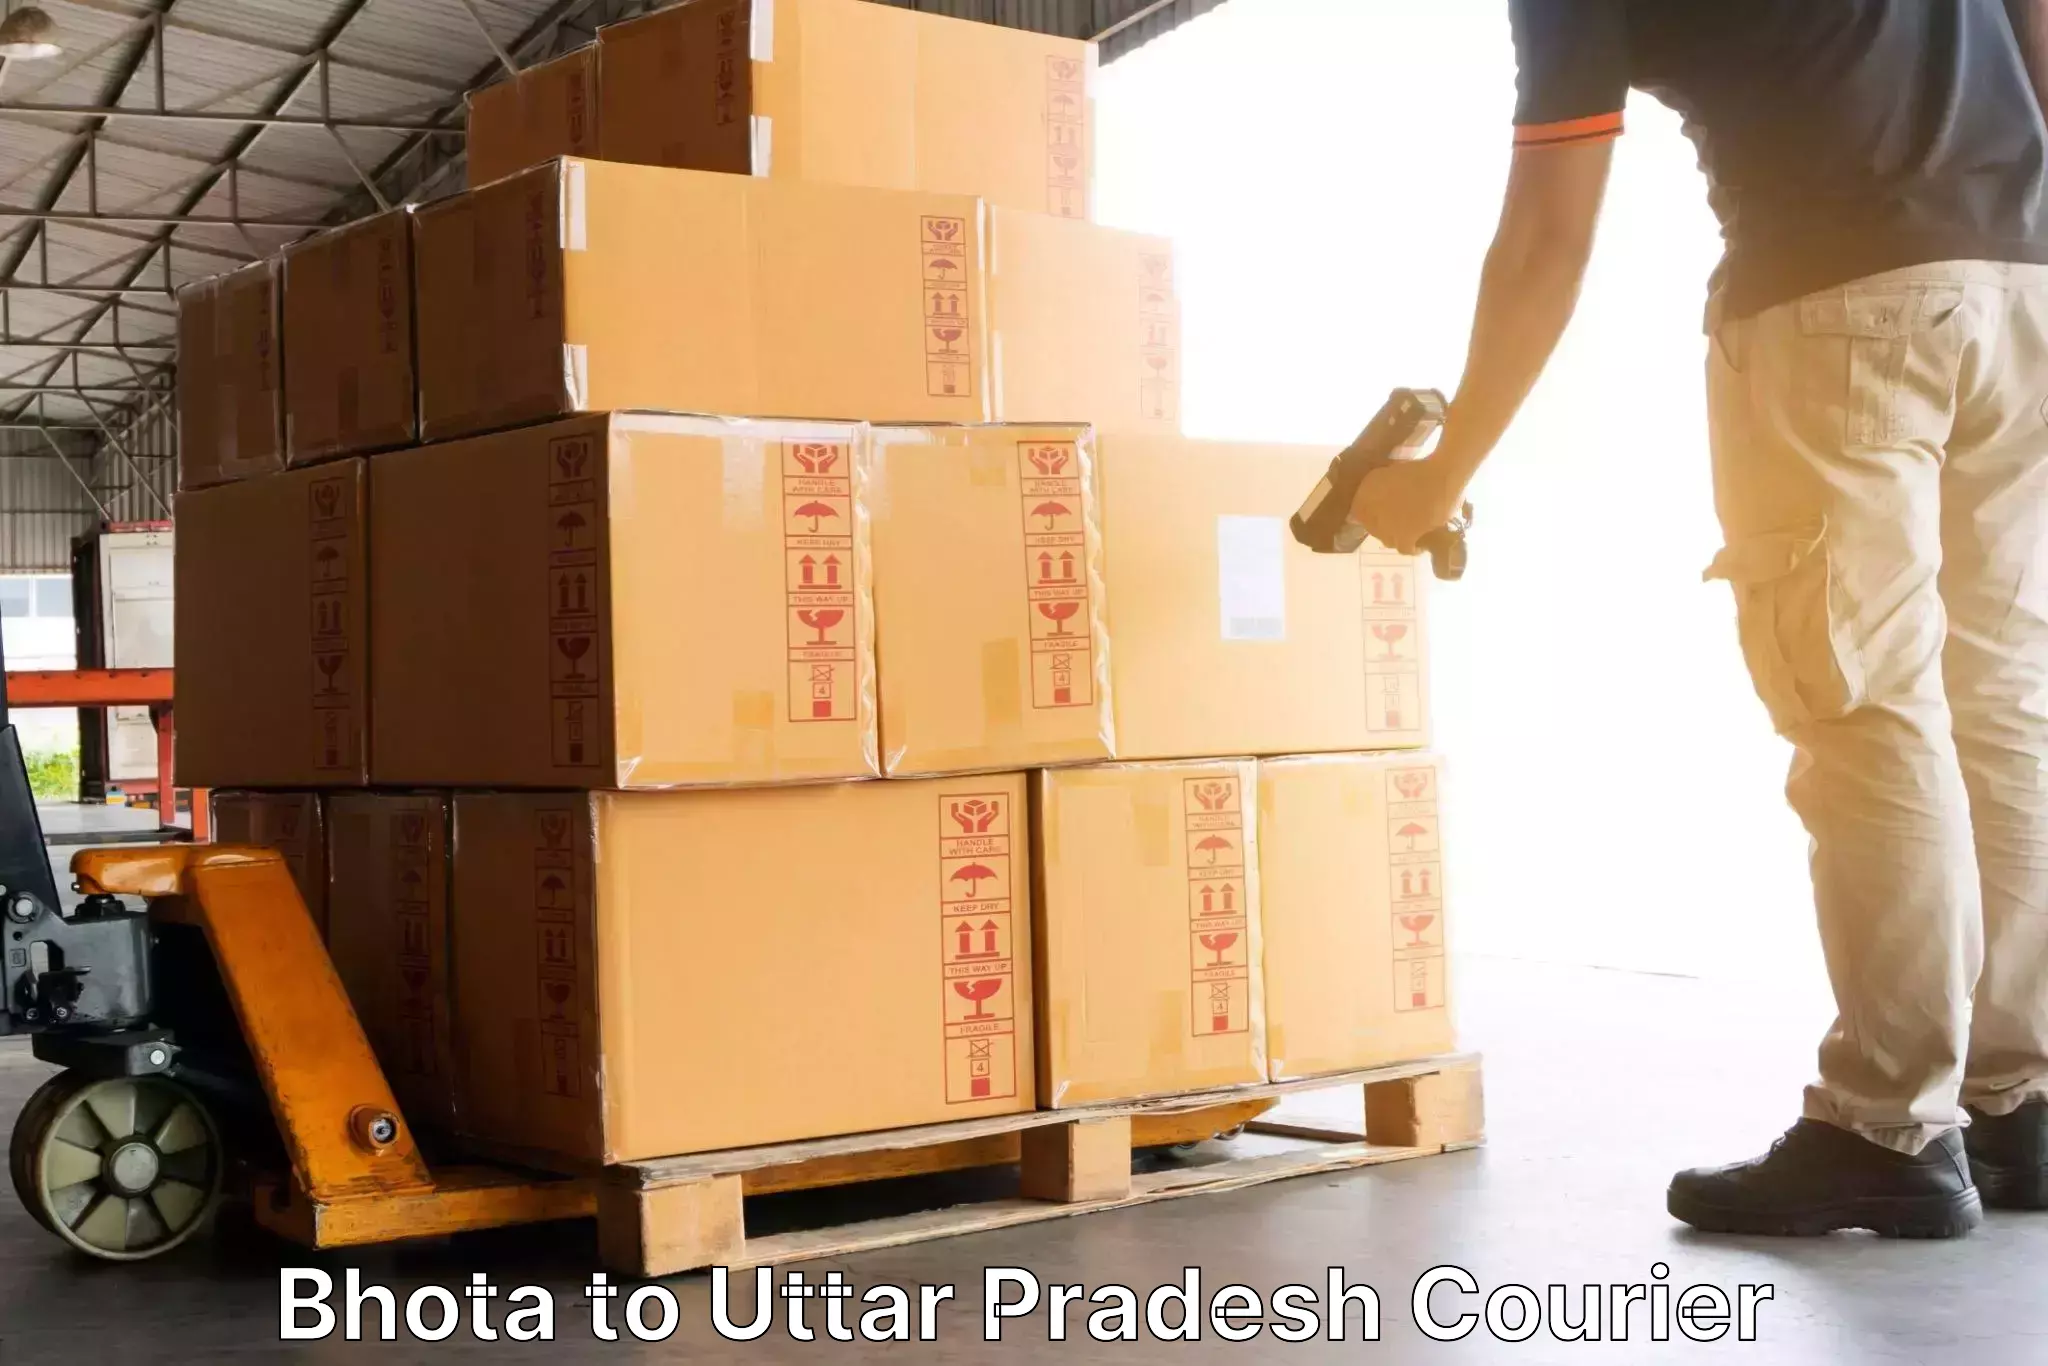 Residential courier service in Bhota to Lalitpur